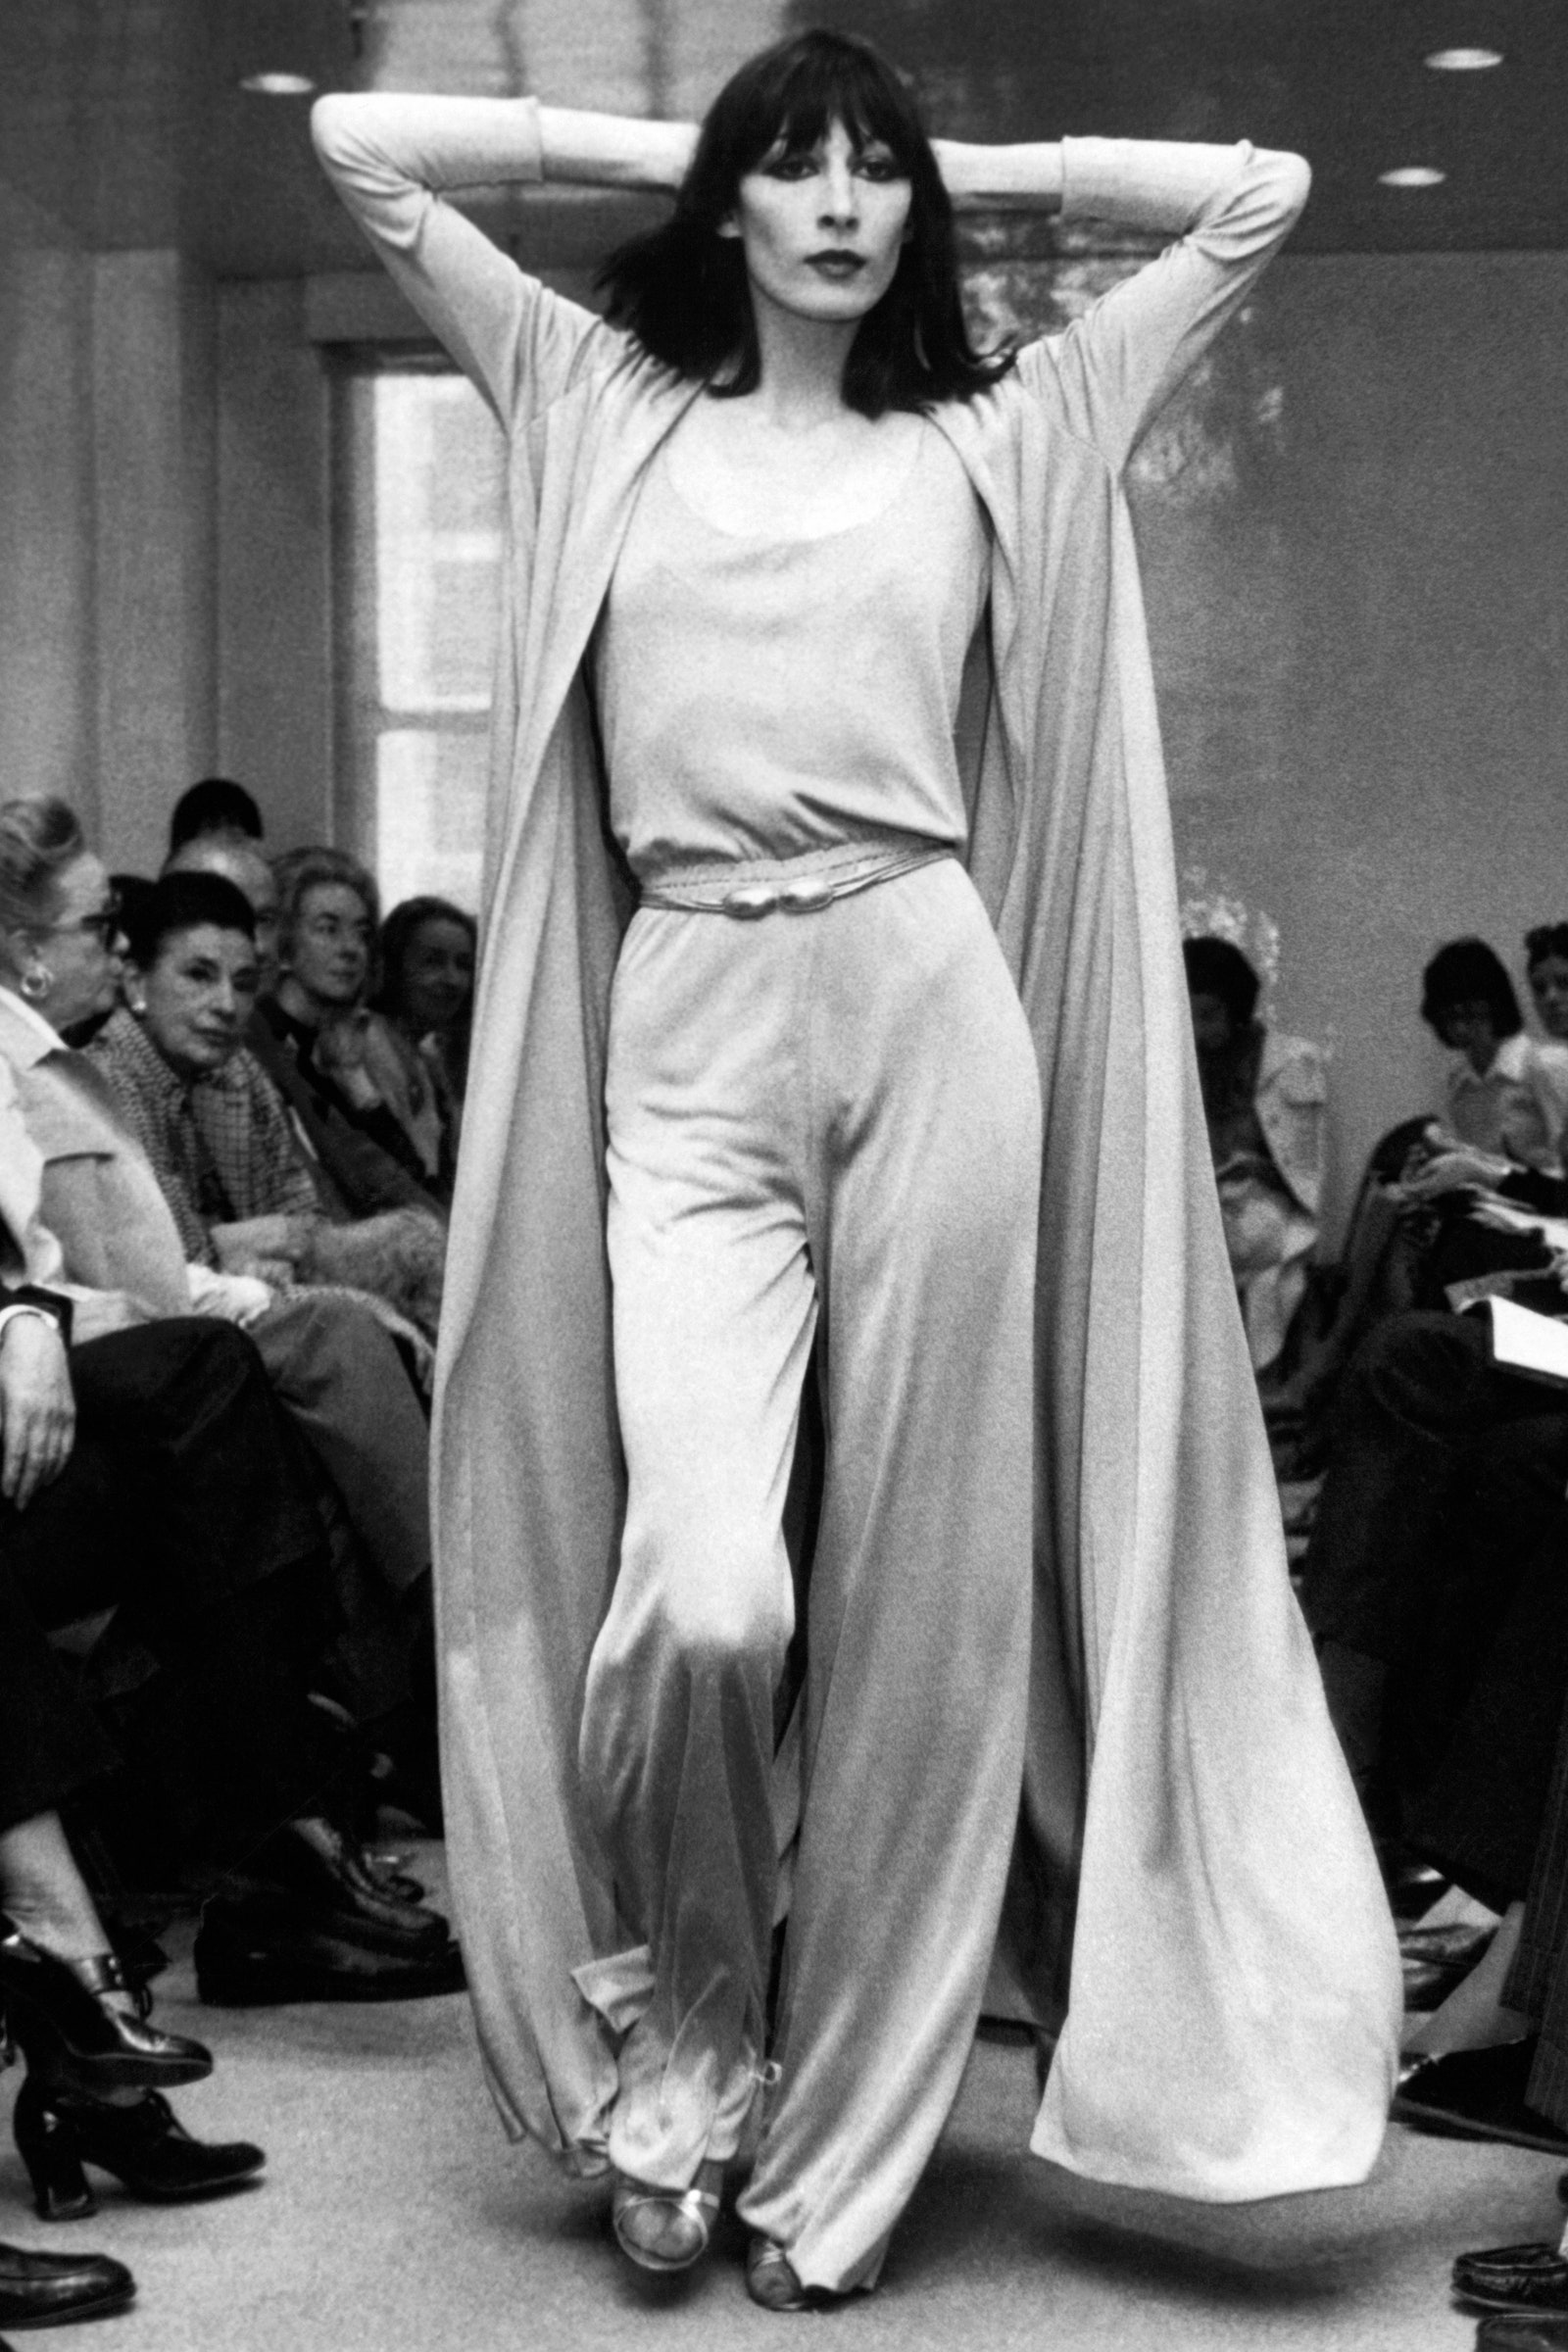 Image may contain Human PersonView of American fashion model and actress Angelica Huston dressed in a jersey evening...